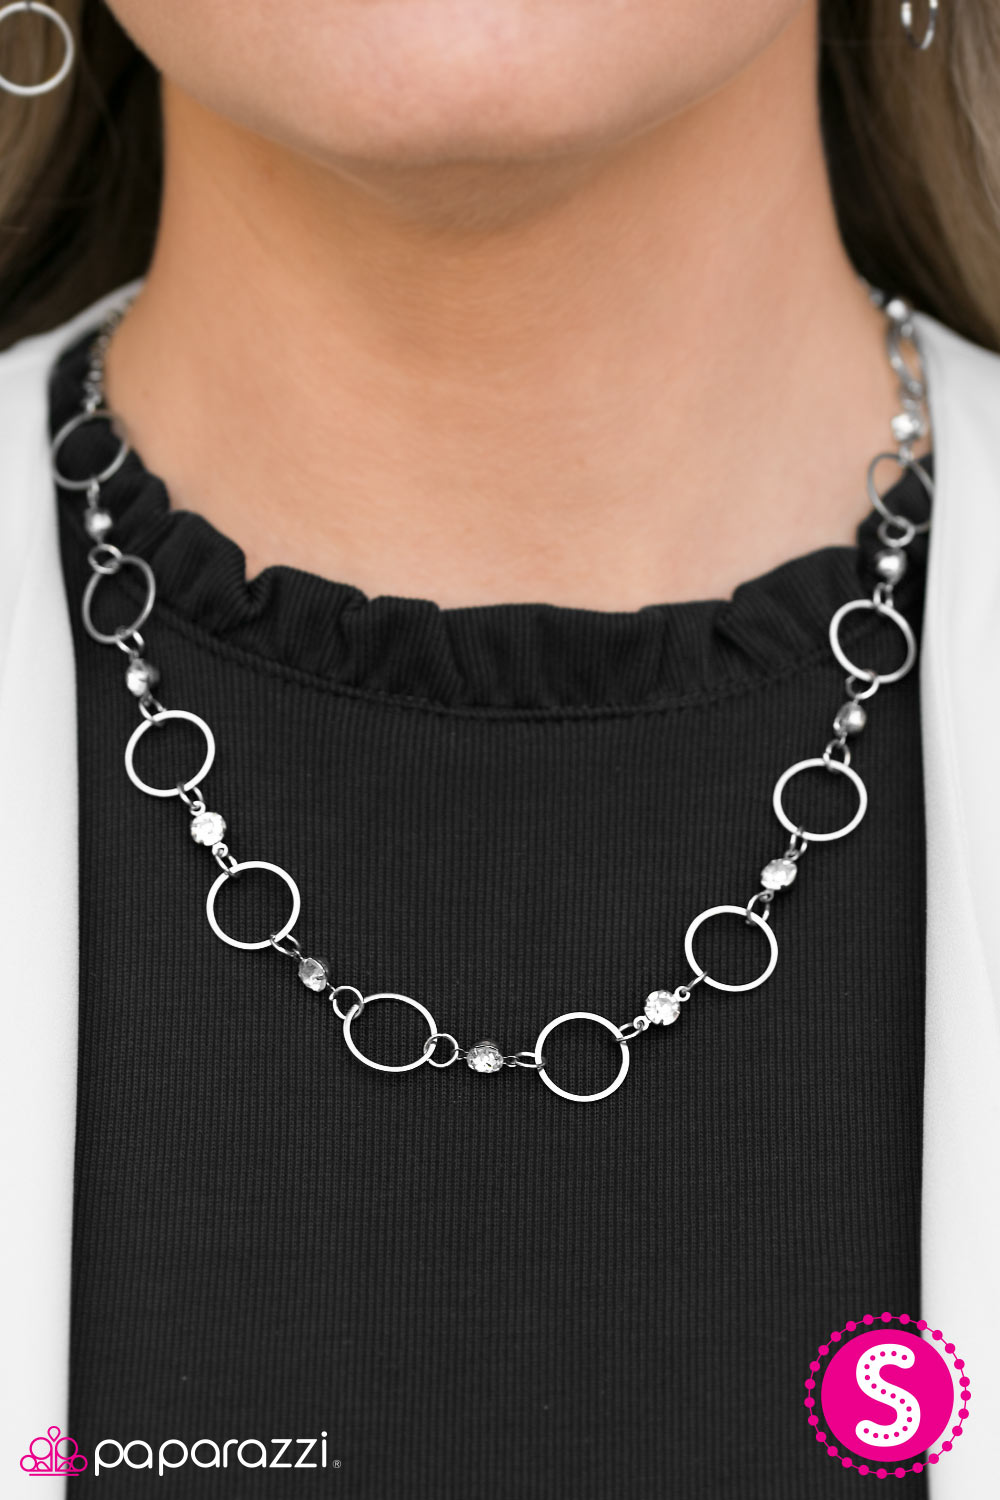 Name Up In Lights - White - Paparazzi necklace